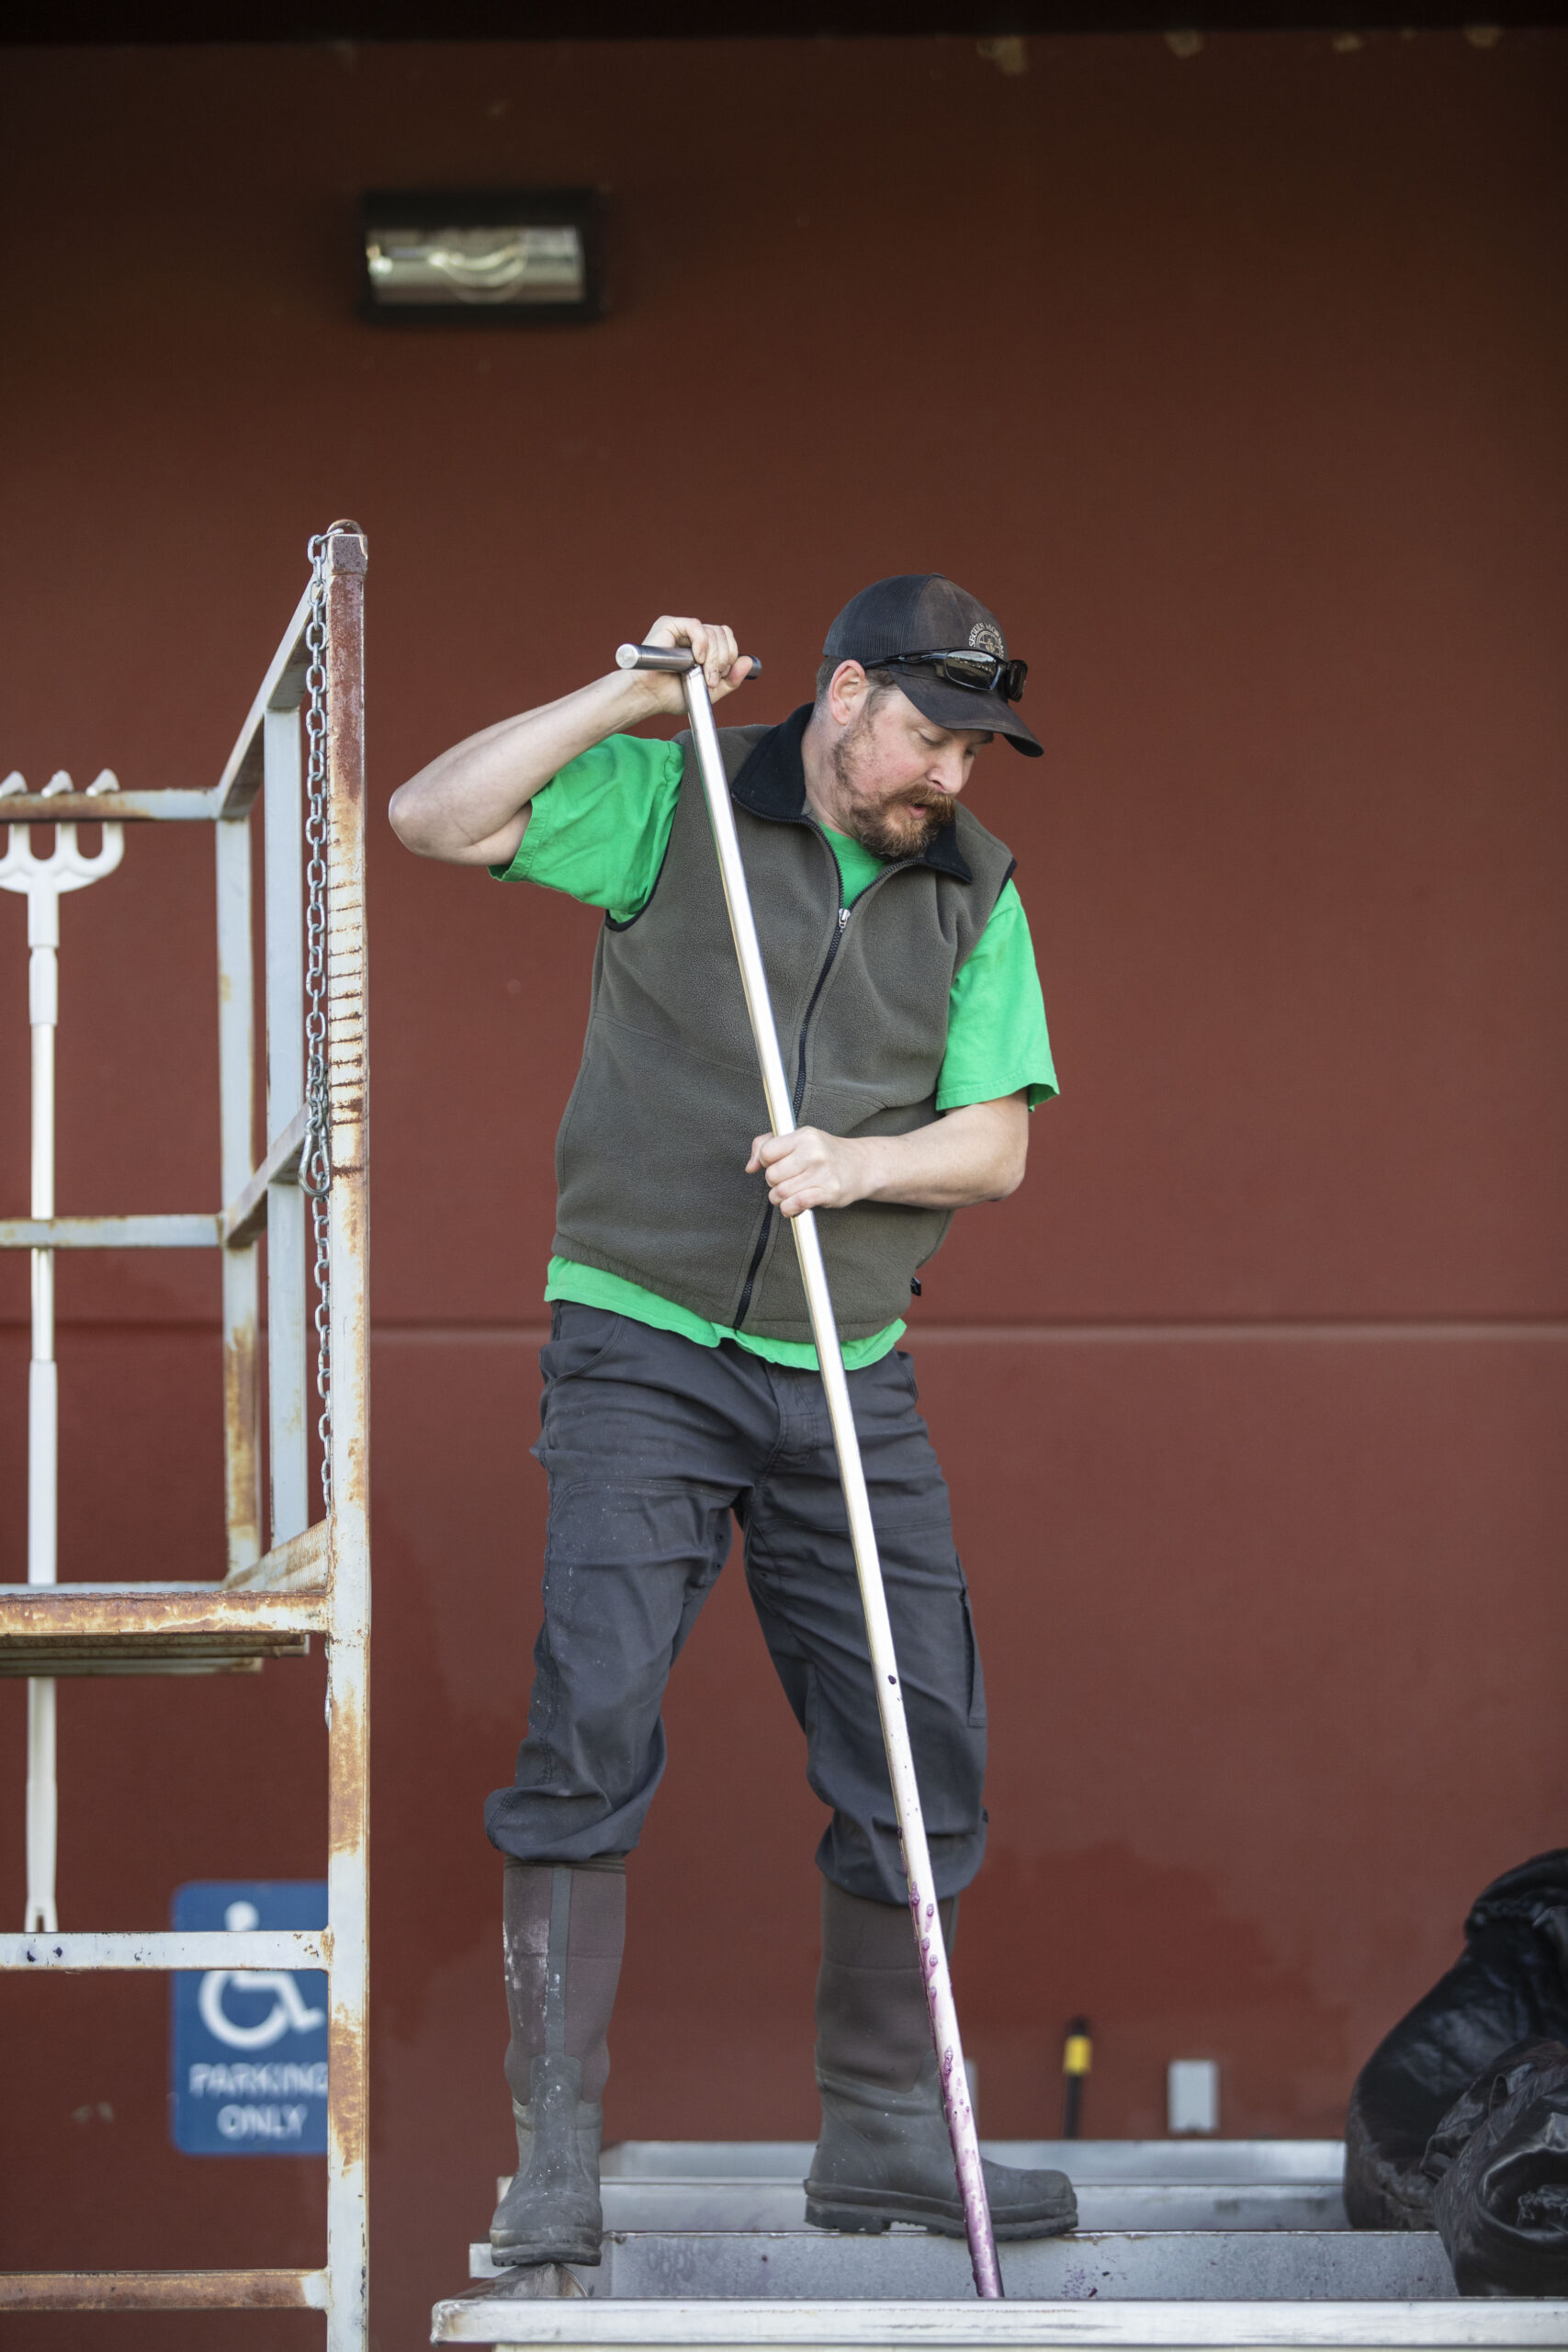 A man in a ballcap and grey vest stands on the edge of a metal container and pushes down a long metal pole into the bin. A red wall and metal structure are behind him.